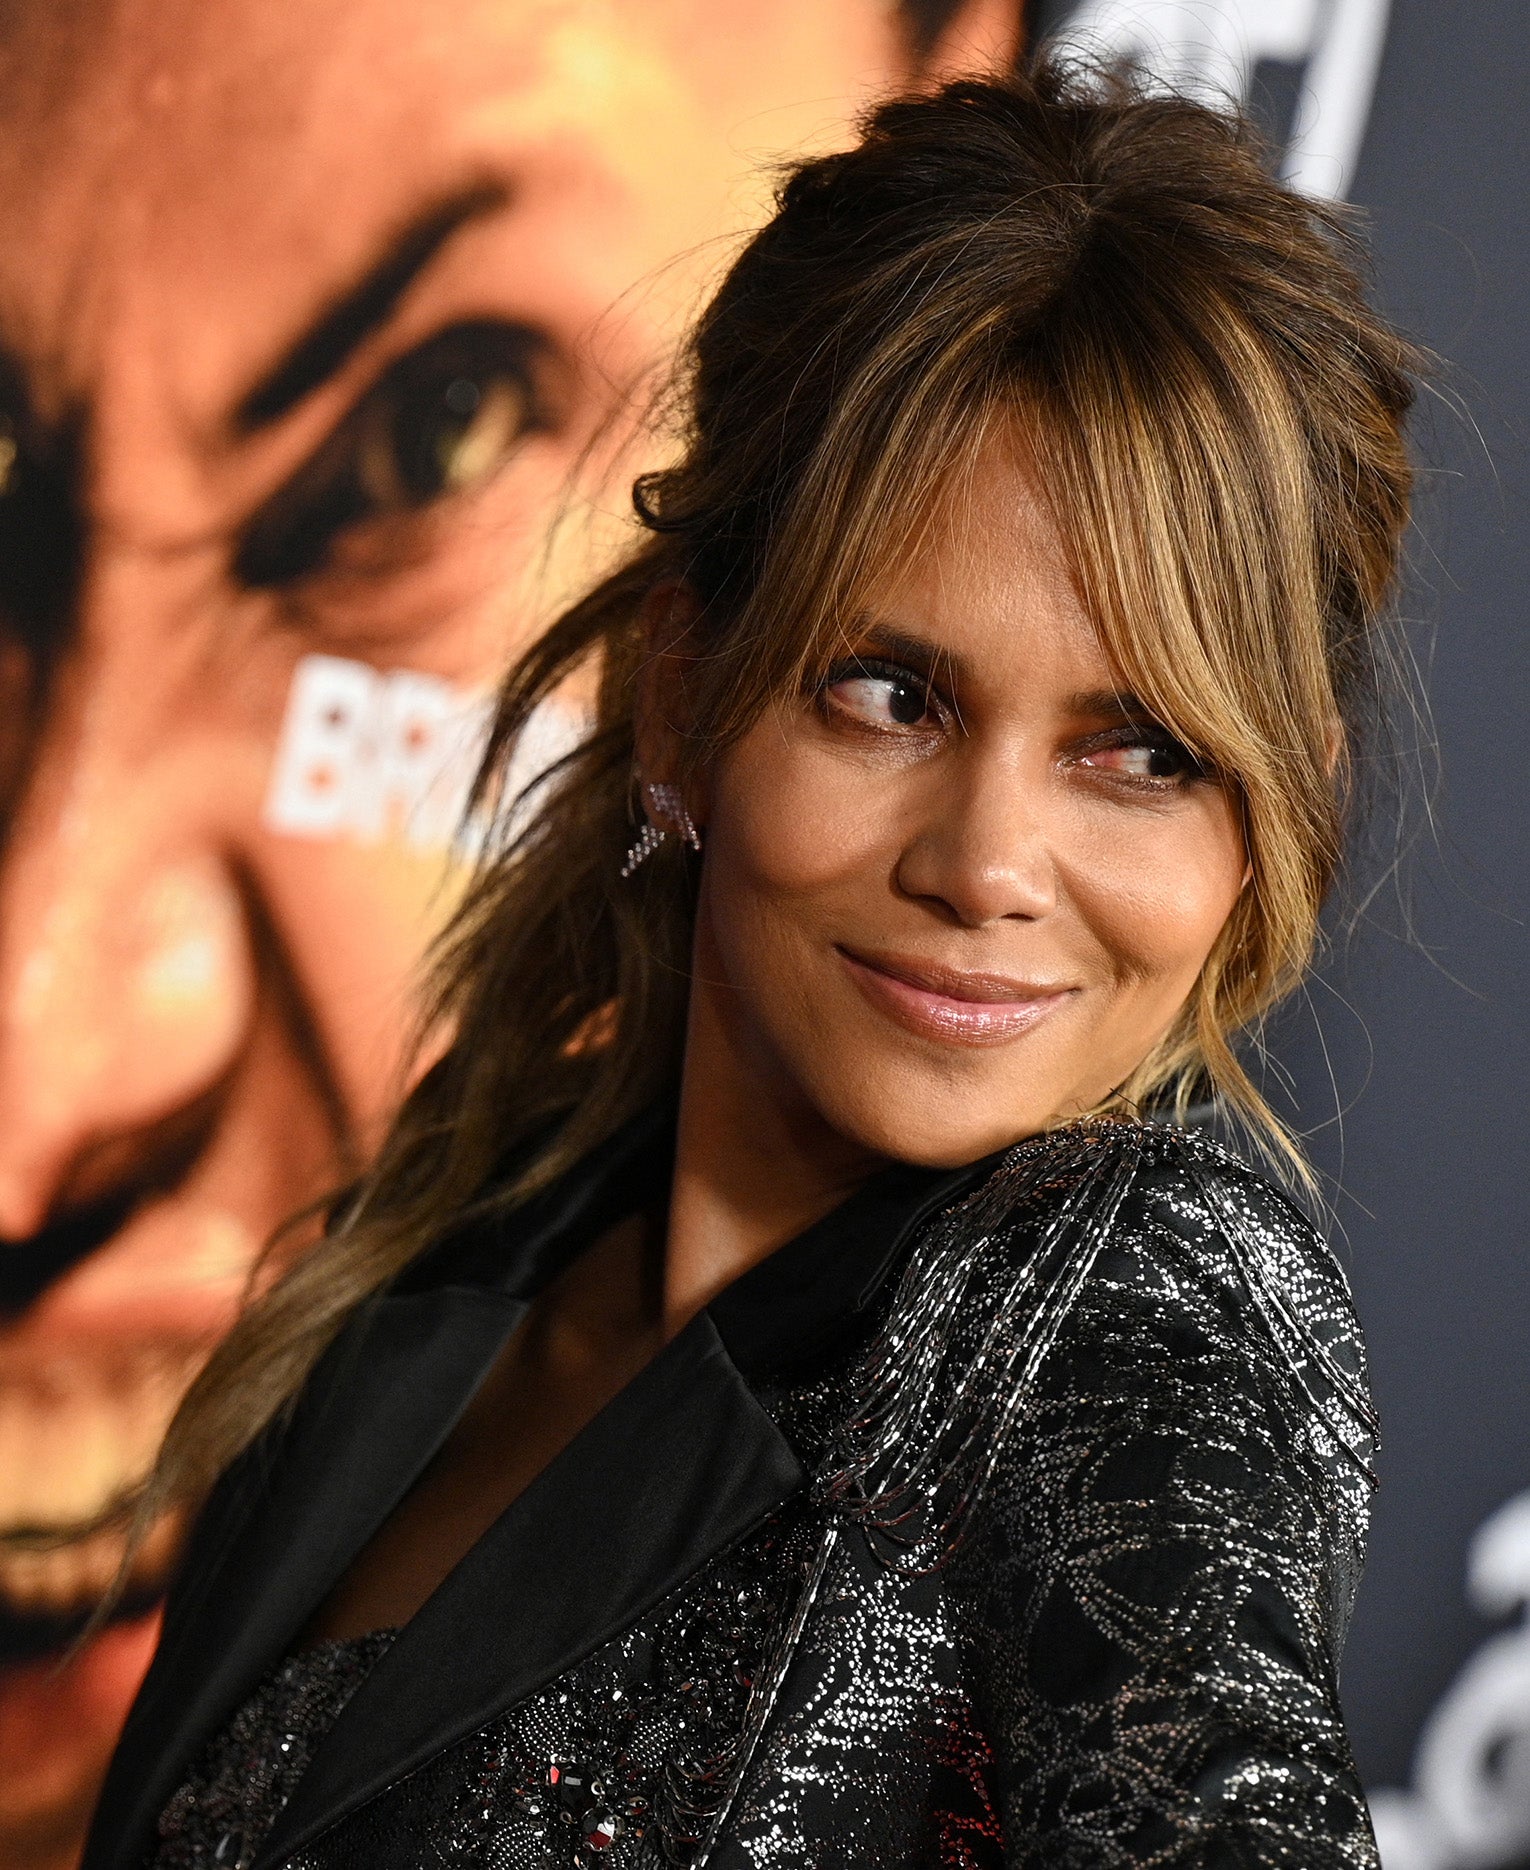 Halle Berry at a ‘Bruised’ event earlier this month